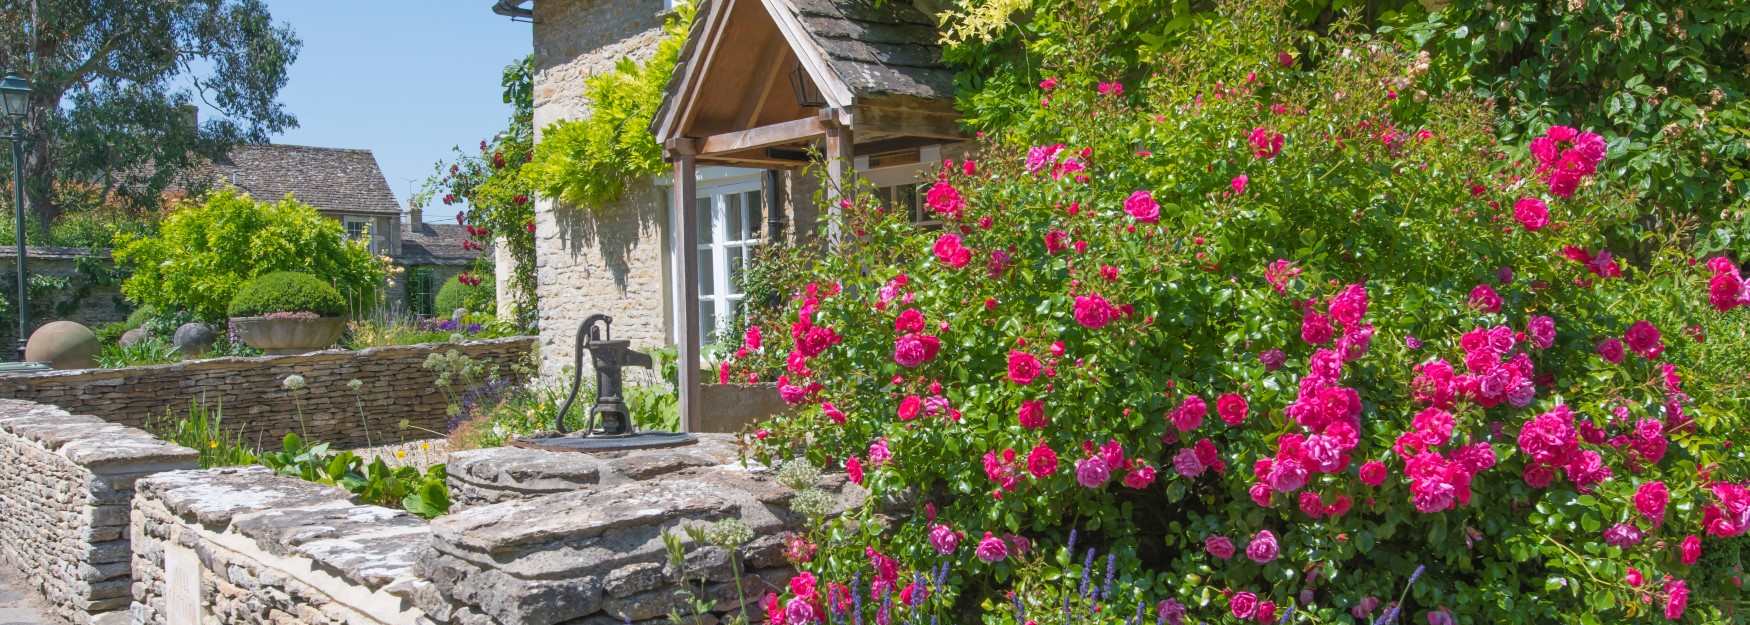 A stunning Cotswold stone cottage with pink roses and lavender growing in the garden